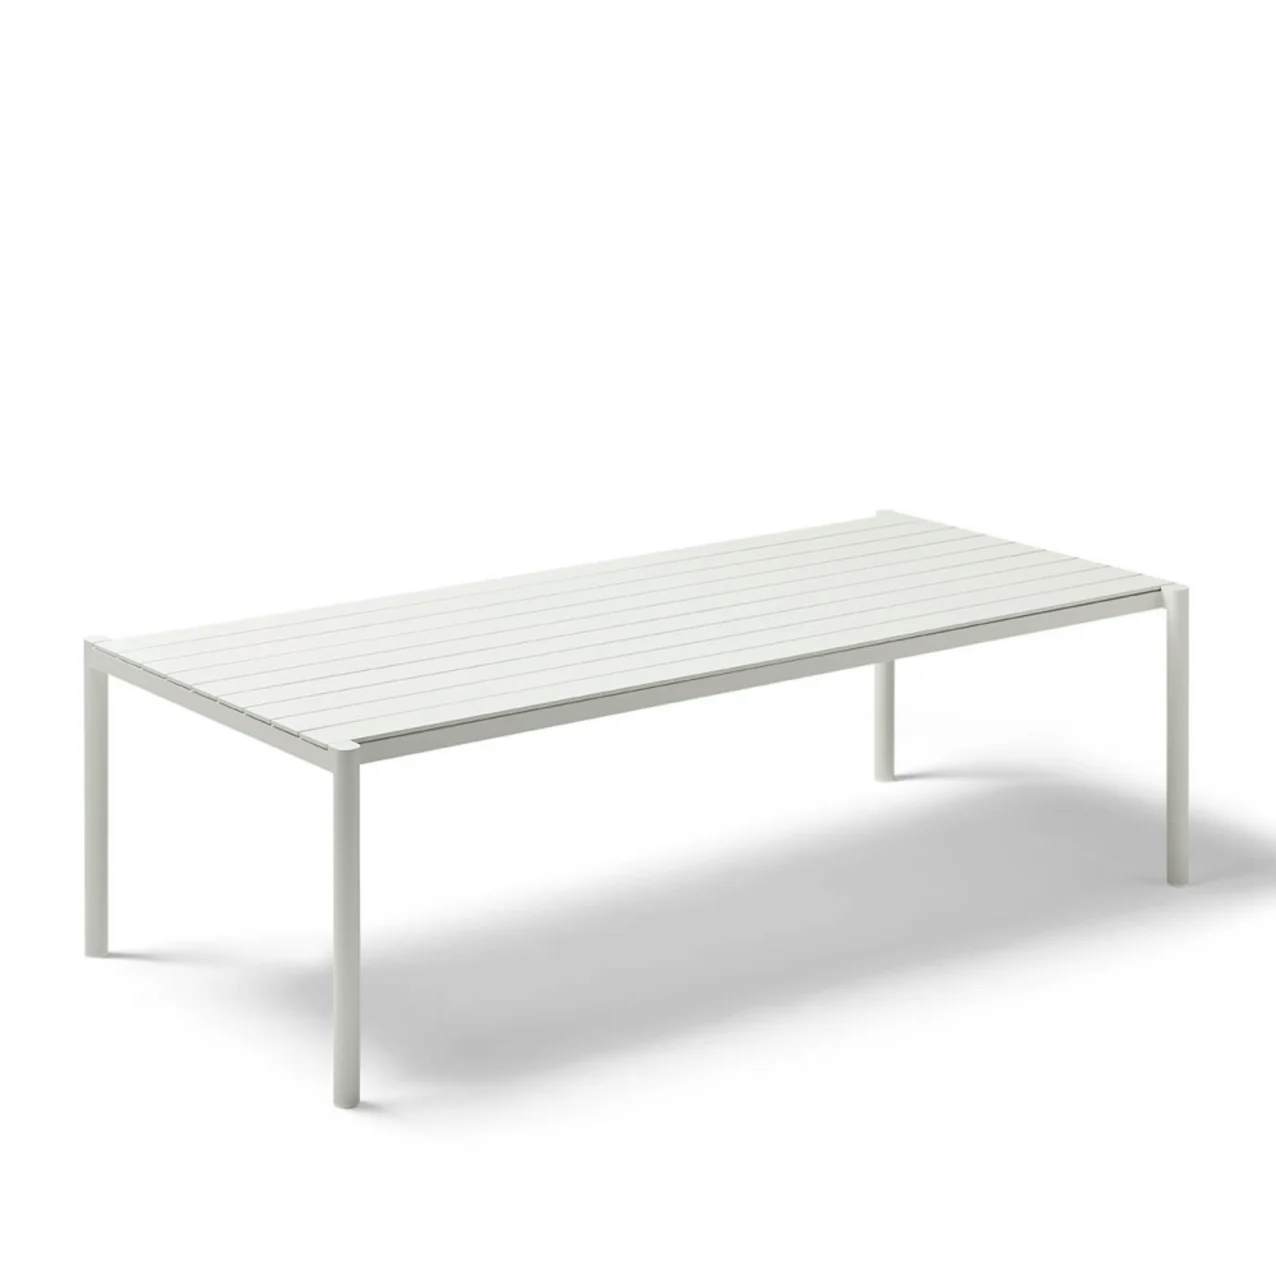 POINT Origin 87" Dining Table | Mineral White Aluminum Table